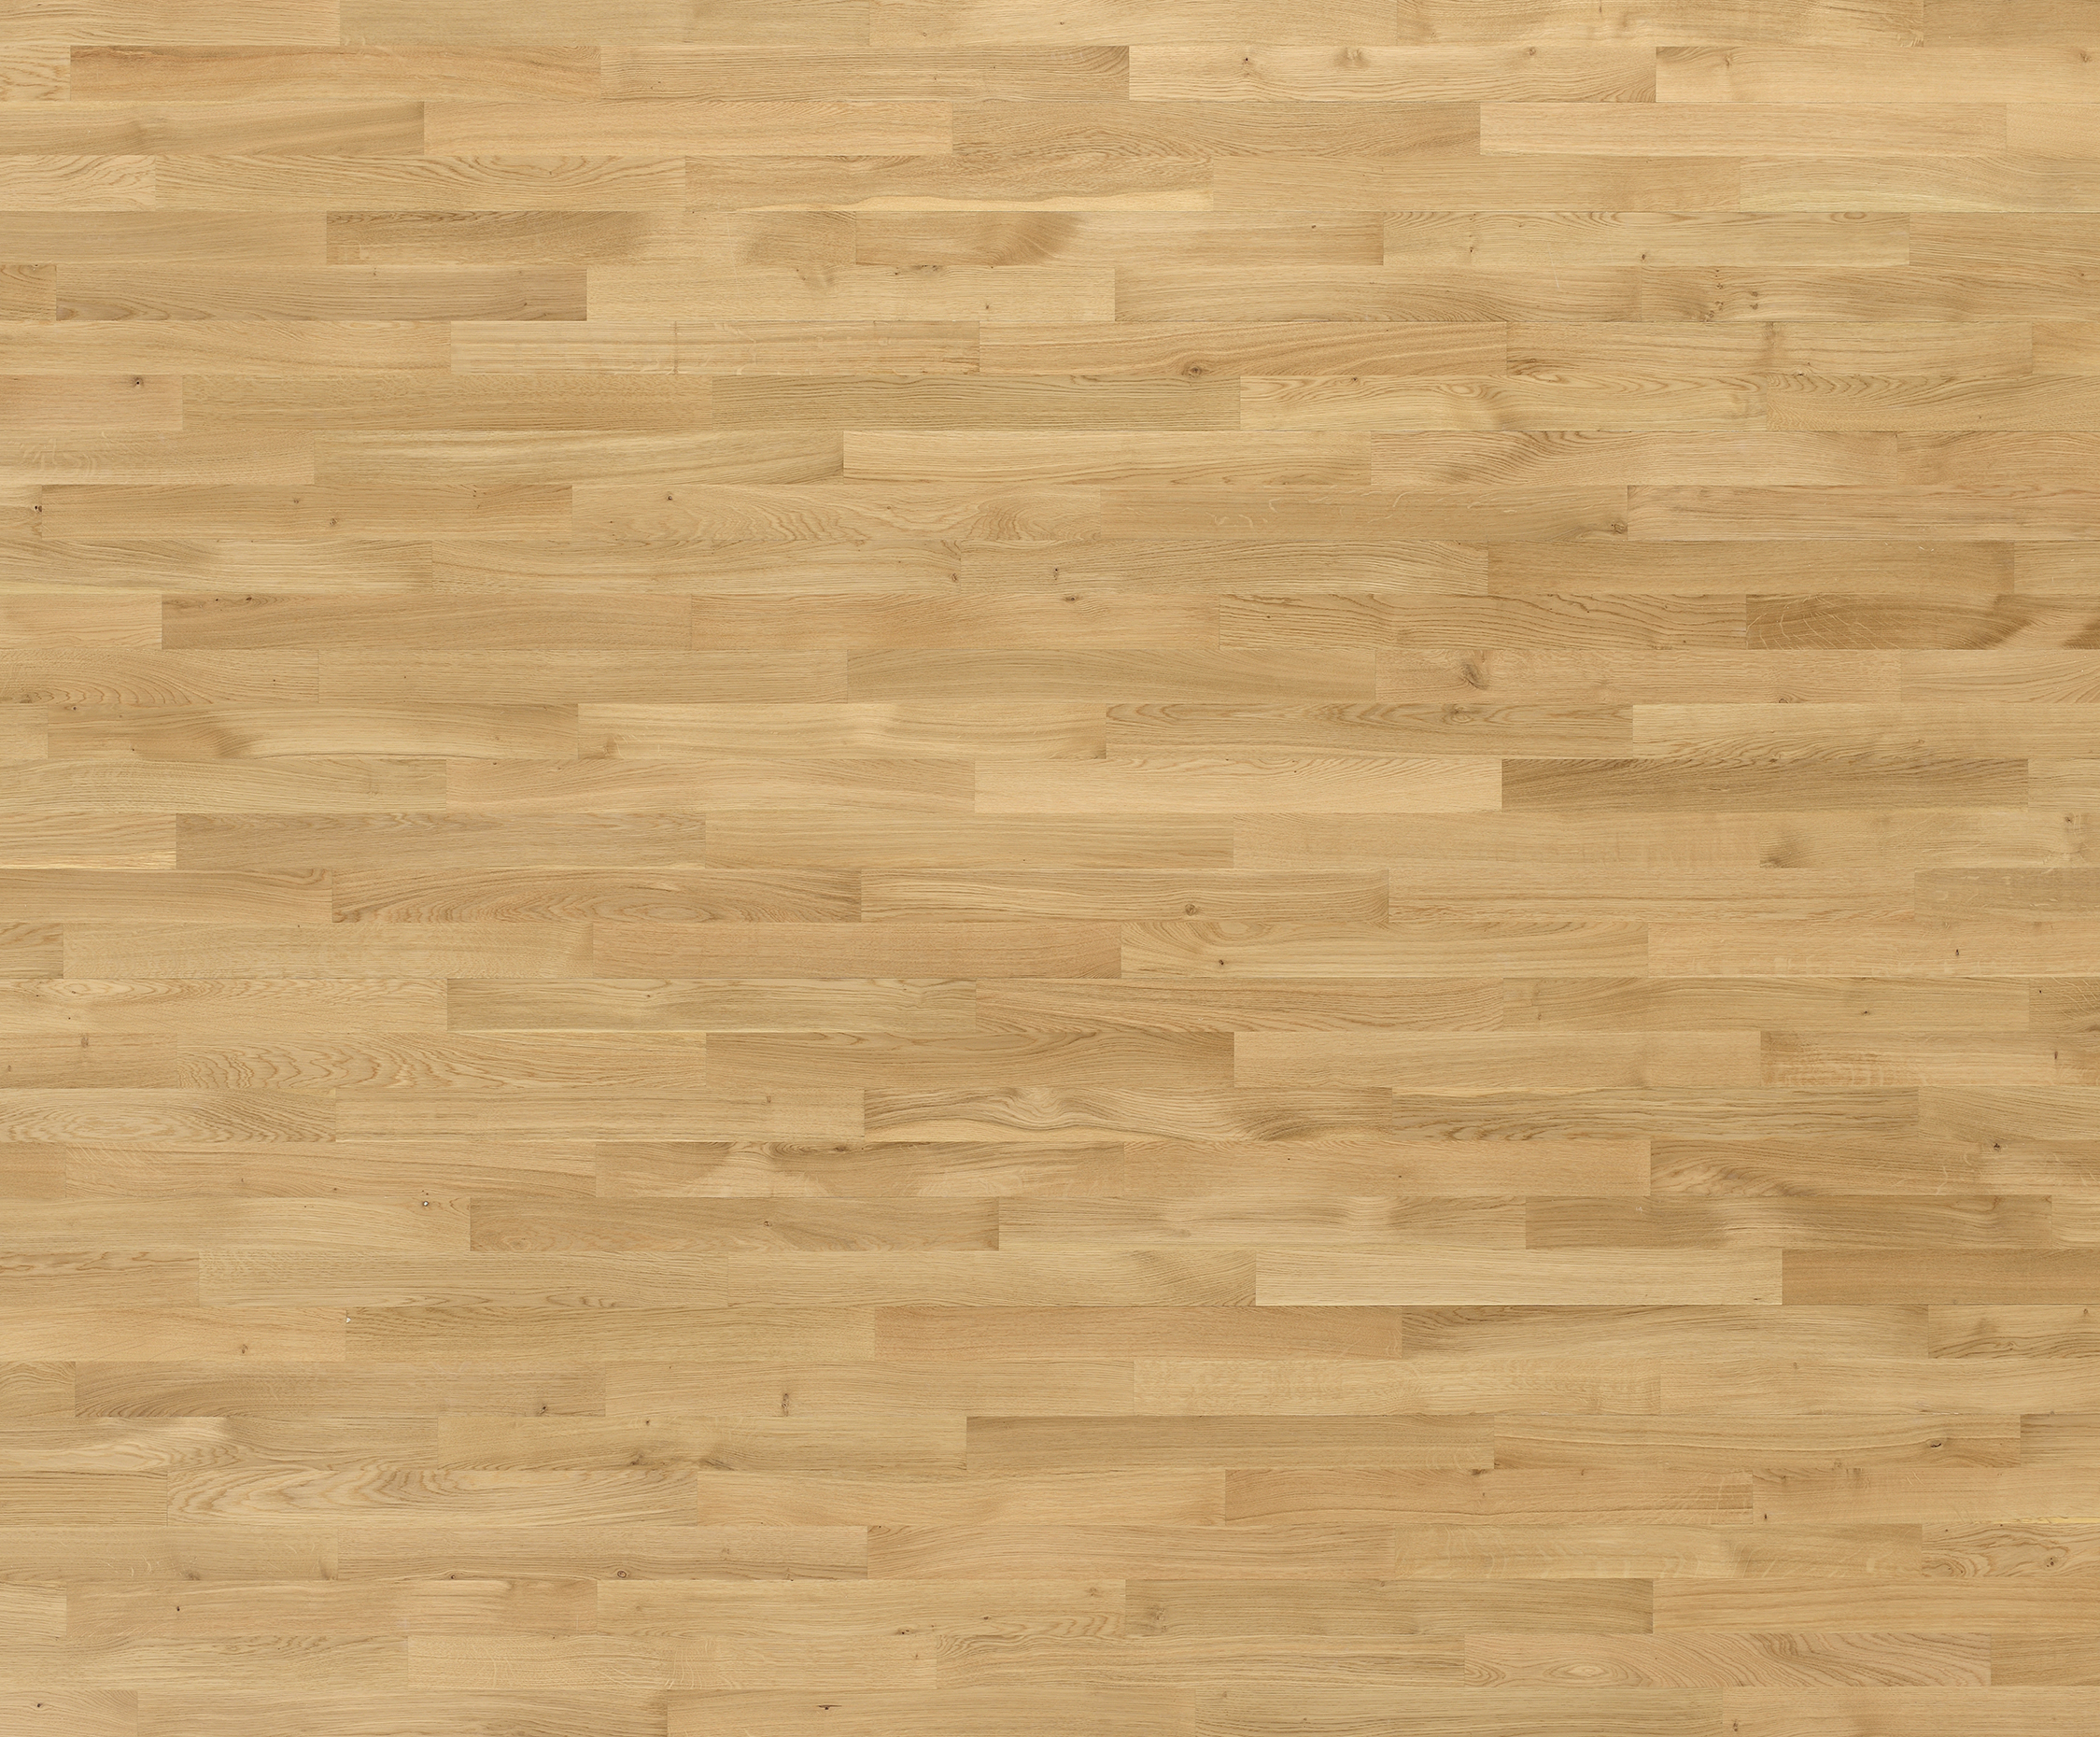 Product Images Wooden Floors